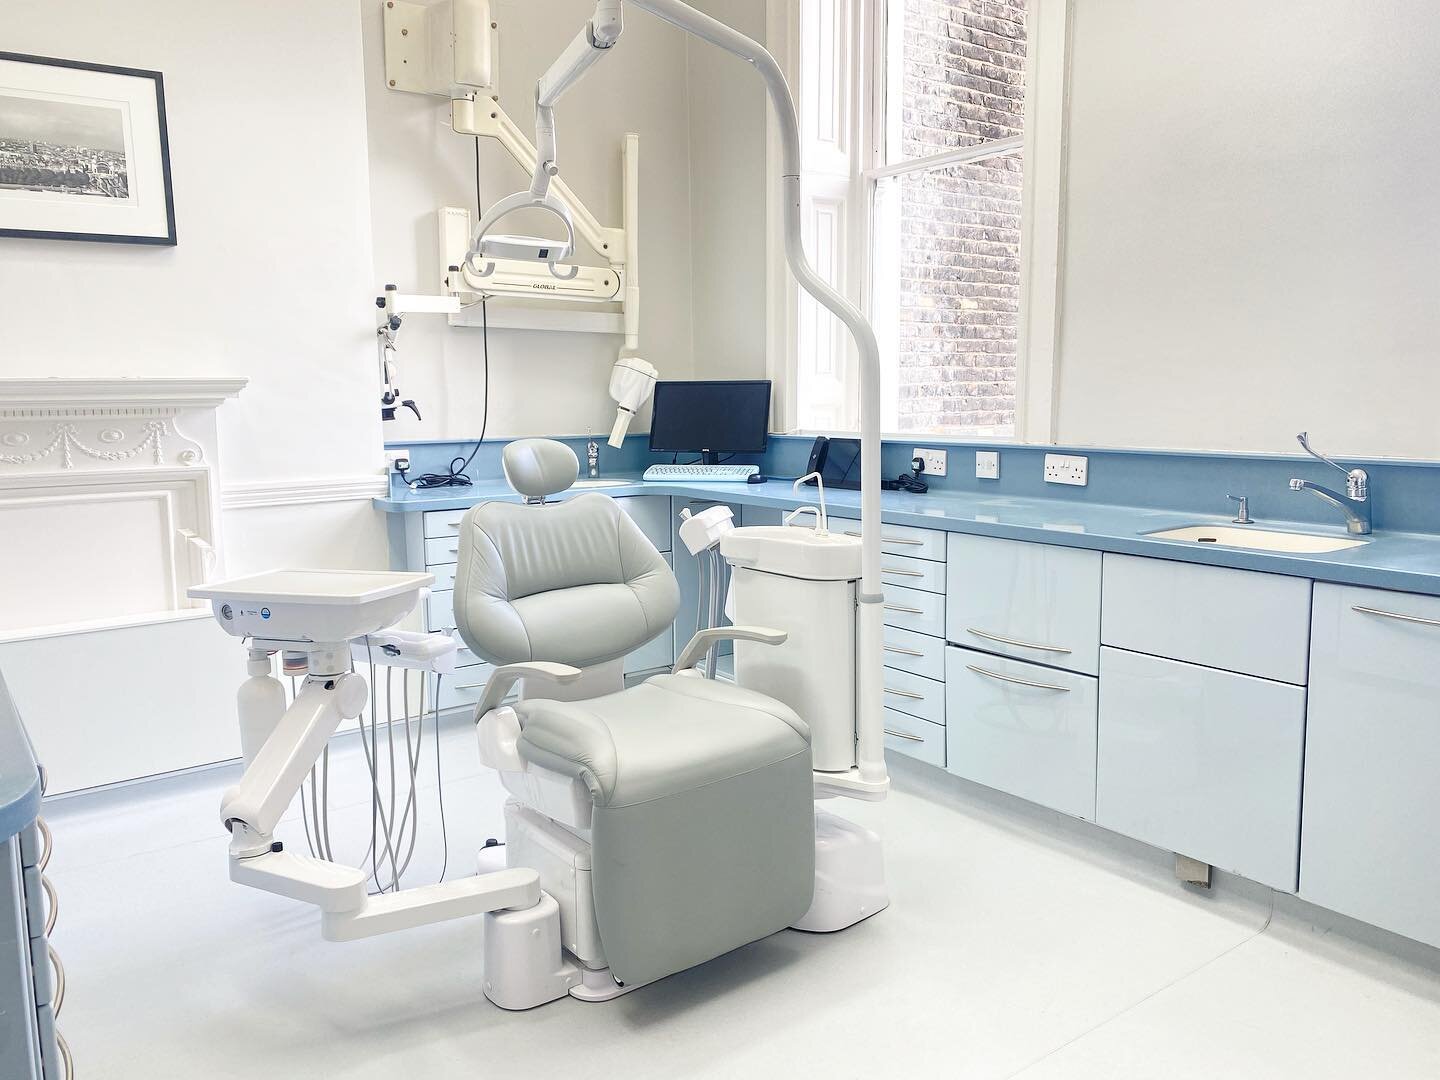 As humans, we have innate awareness of our environments. We naturally seek out environments with certain qualities such as safety and security.⁣
⁣
At Carling Dental our rooms have been designed to be spacious and light to make you feel as comfortable